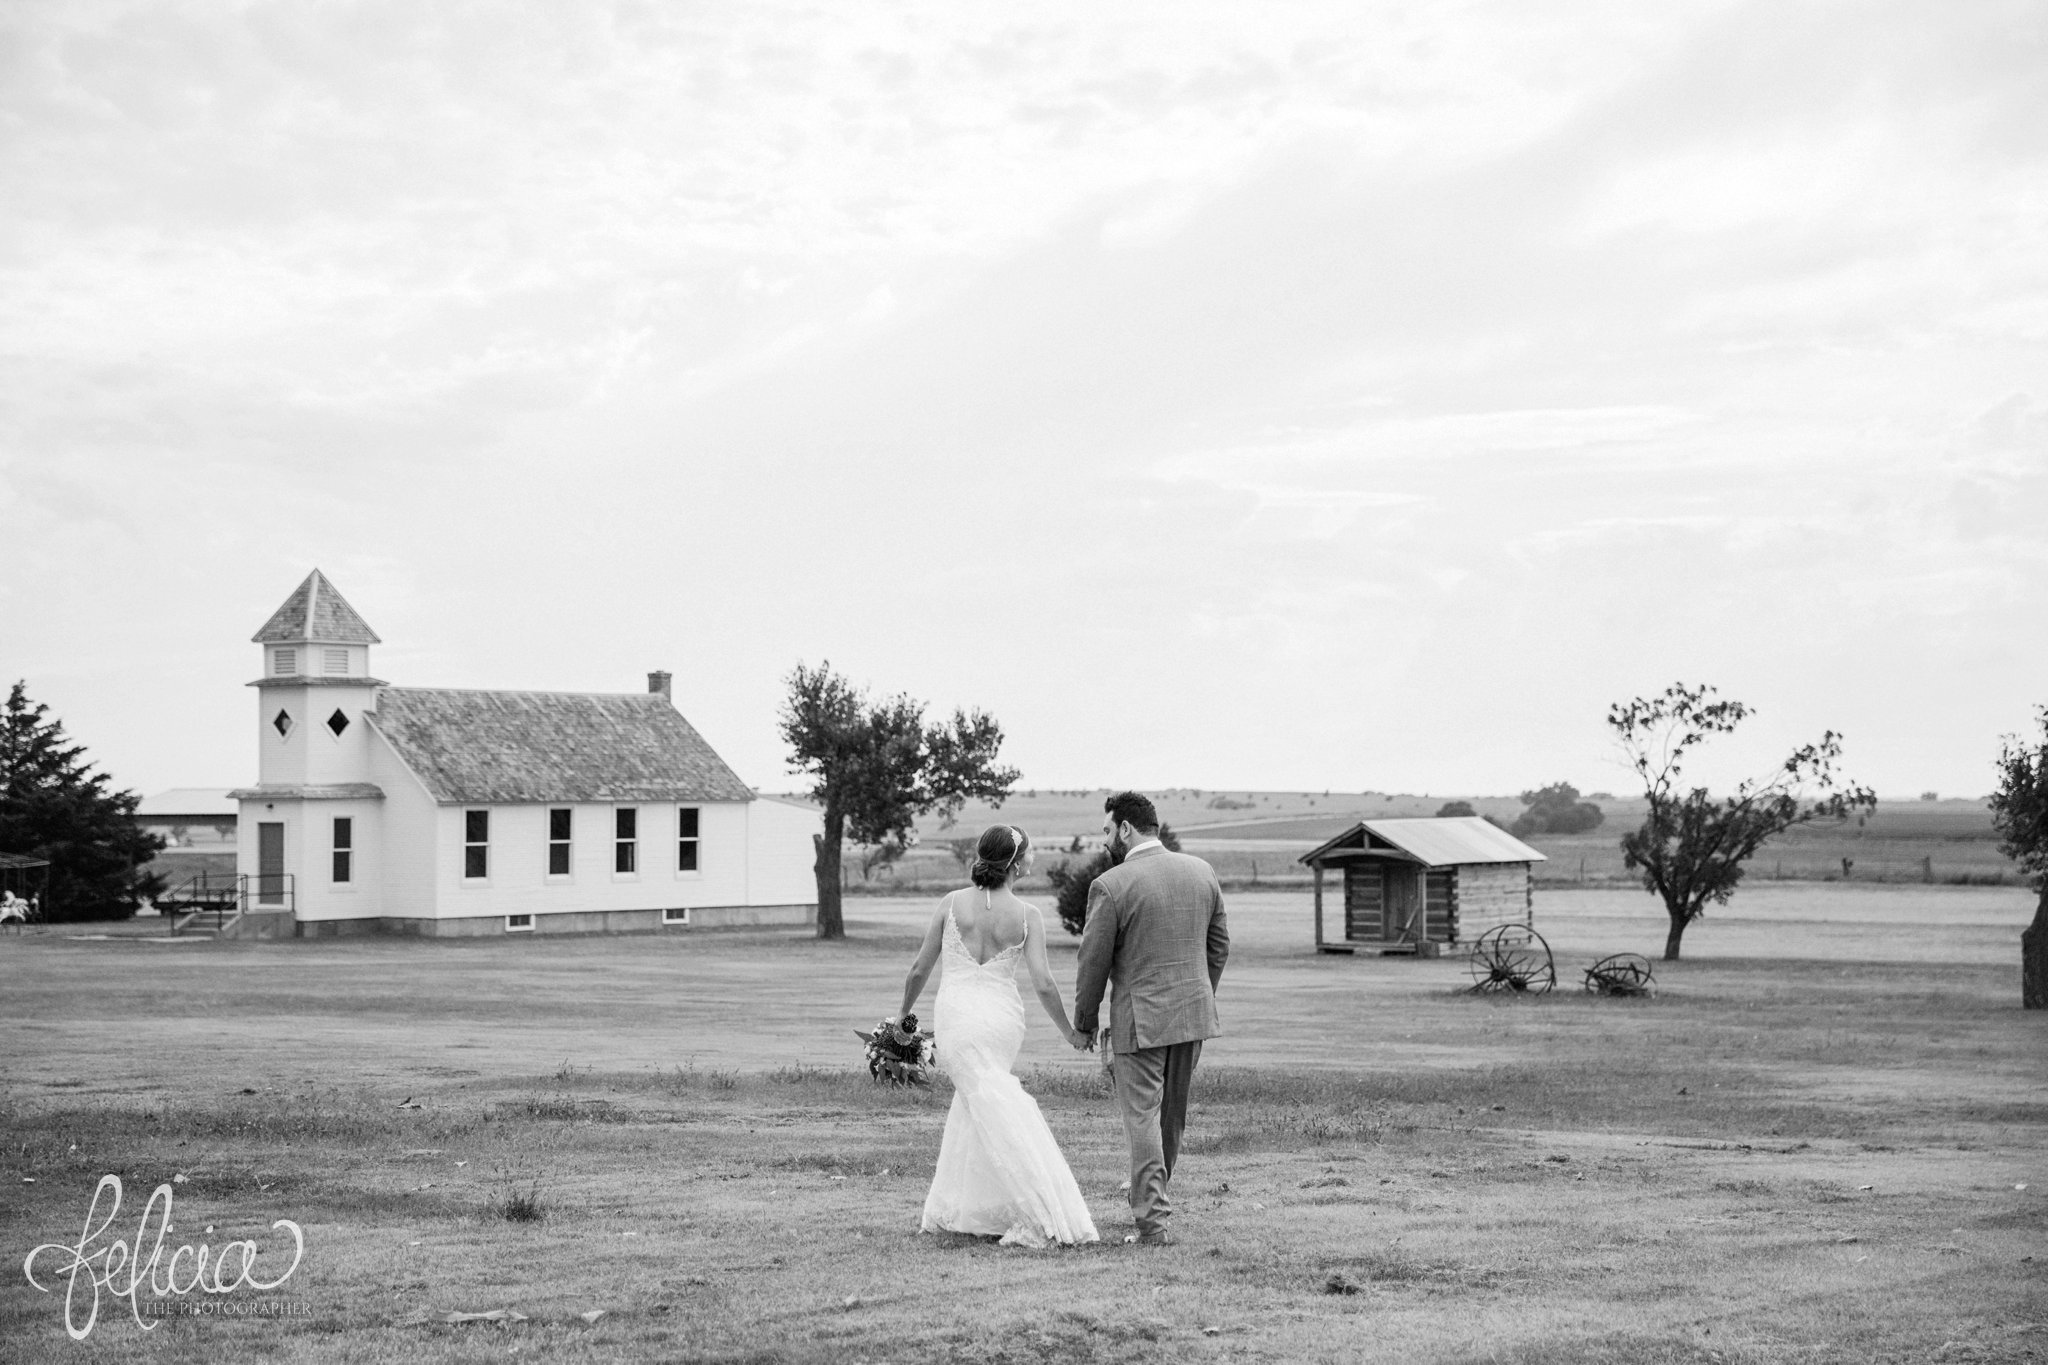 Black and White | Wedding | Wedding Photography | Wedding Photos | Travel Photographer | Images by feliciathephotographer.com | Kansas | Bride and Groom Portrait | Candid | Walking in Field | Chapel | Holding Hands 